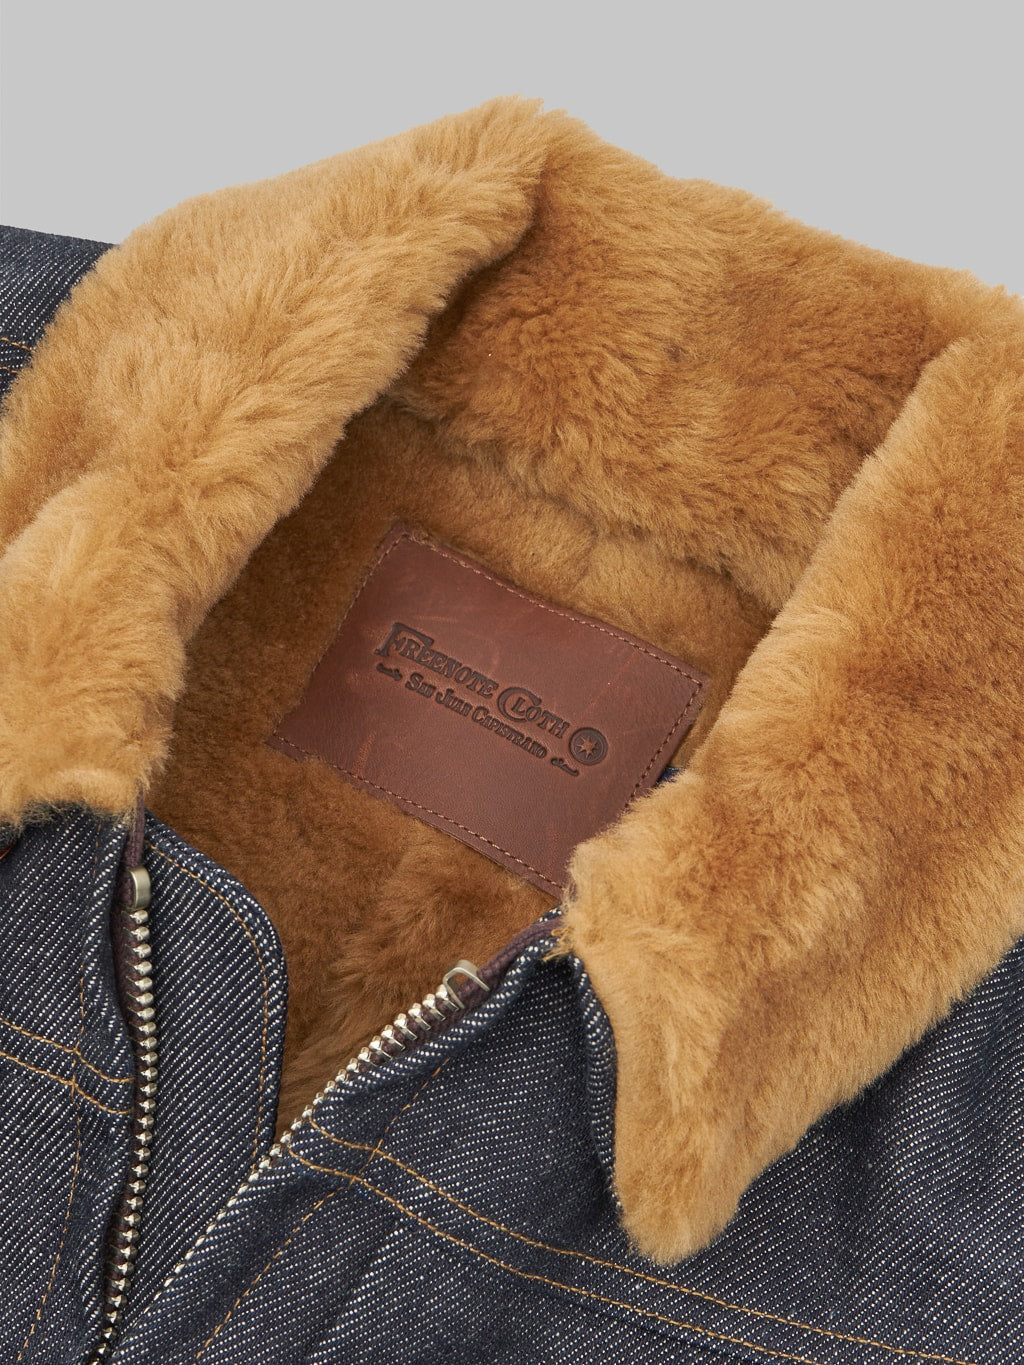 Freenote Cloth Denim Shearling Jacket collar brand leather patch